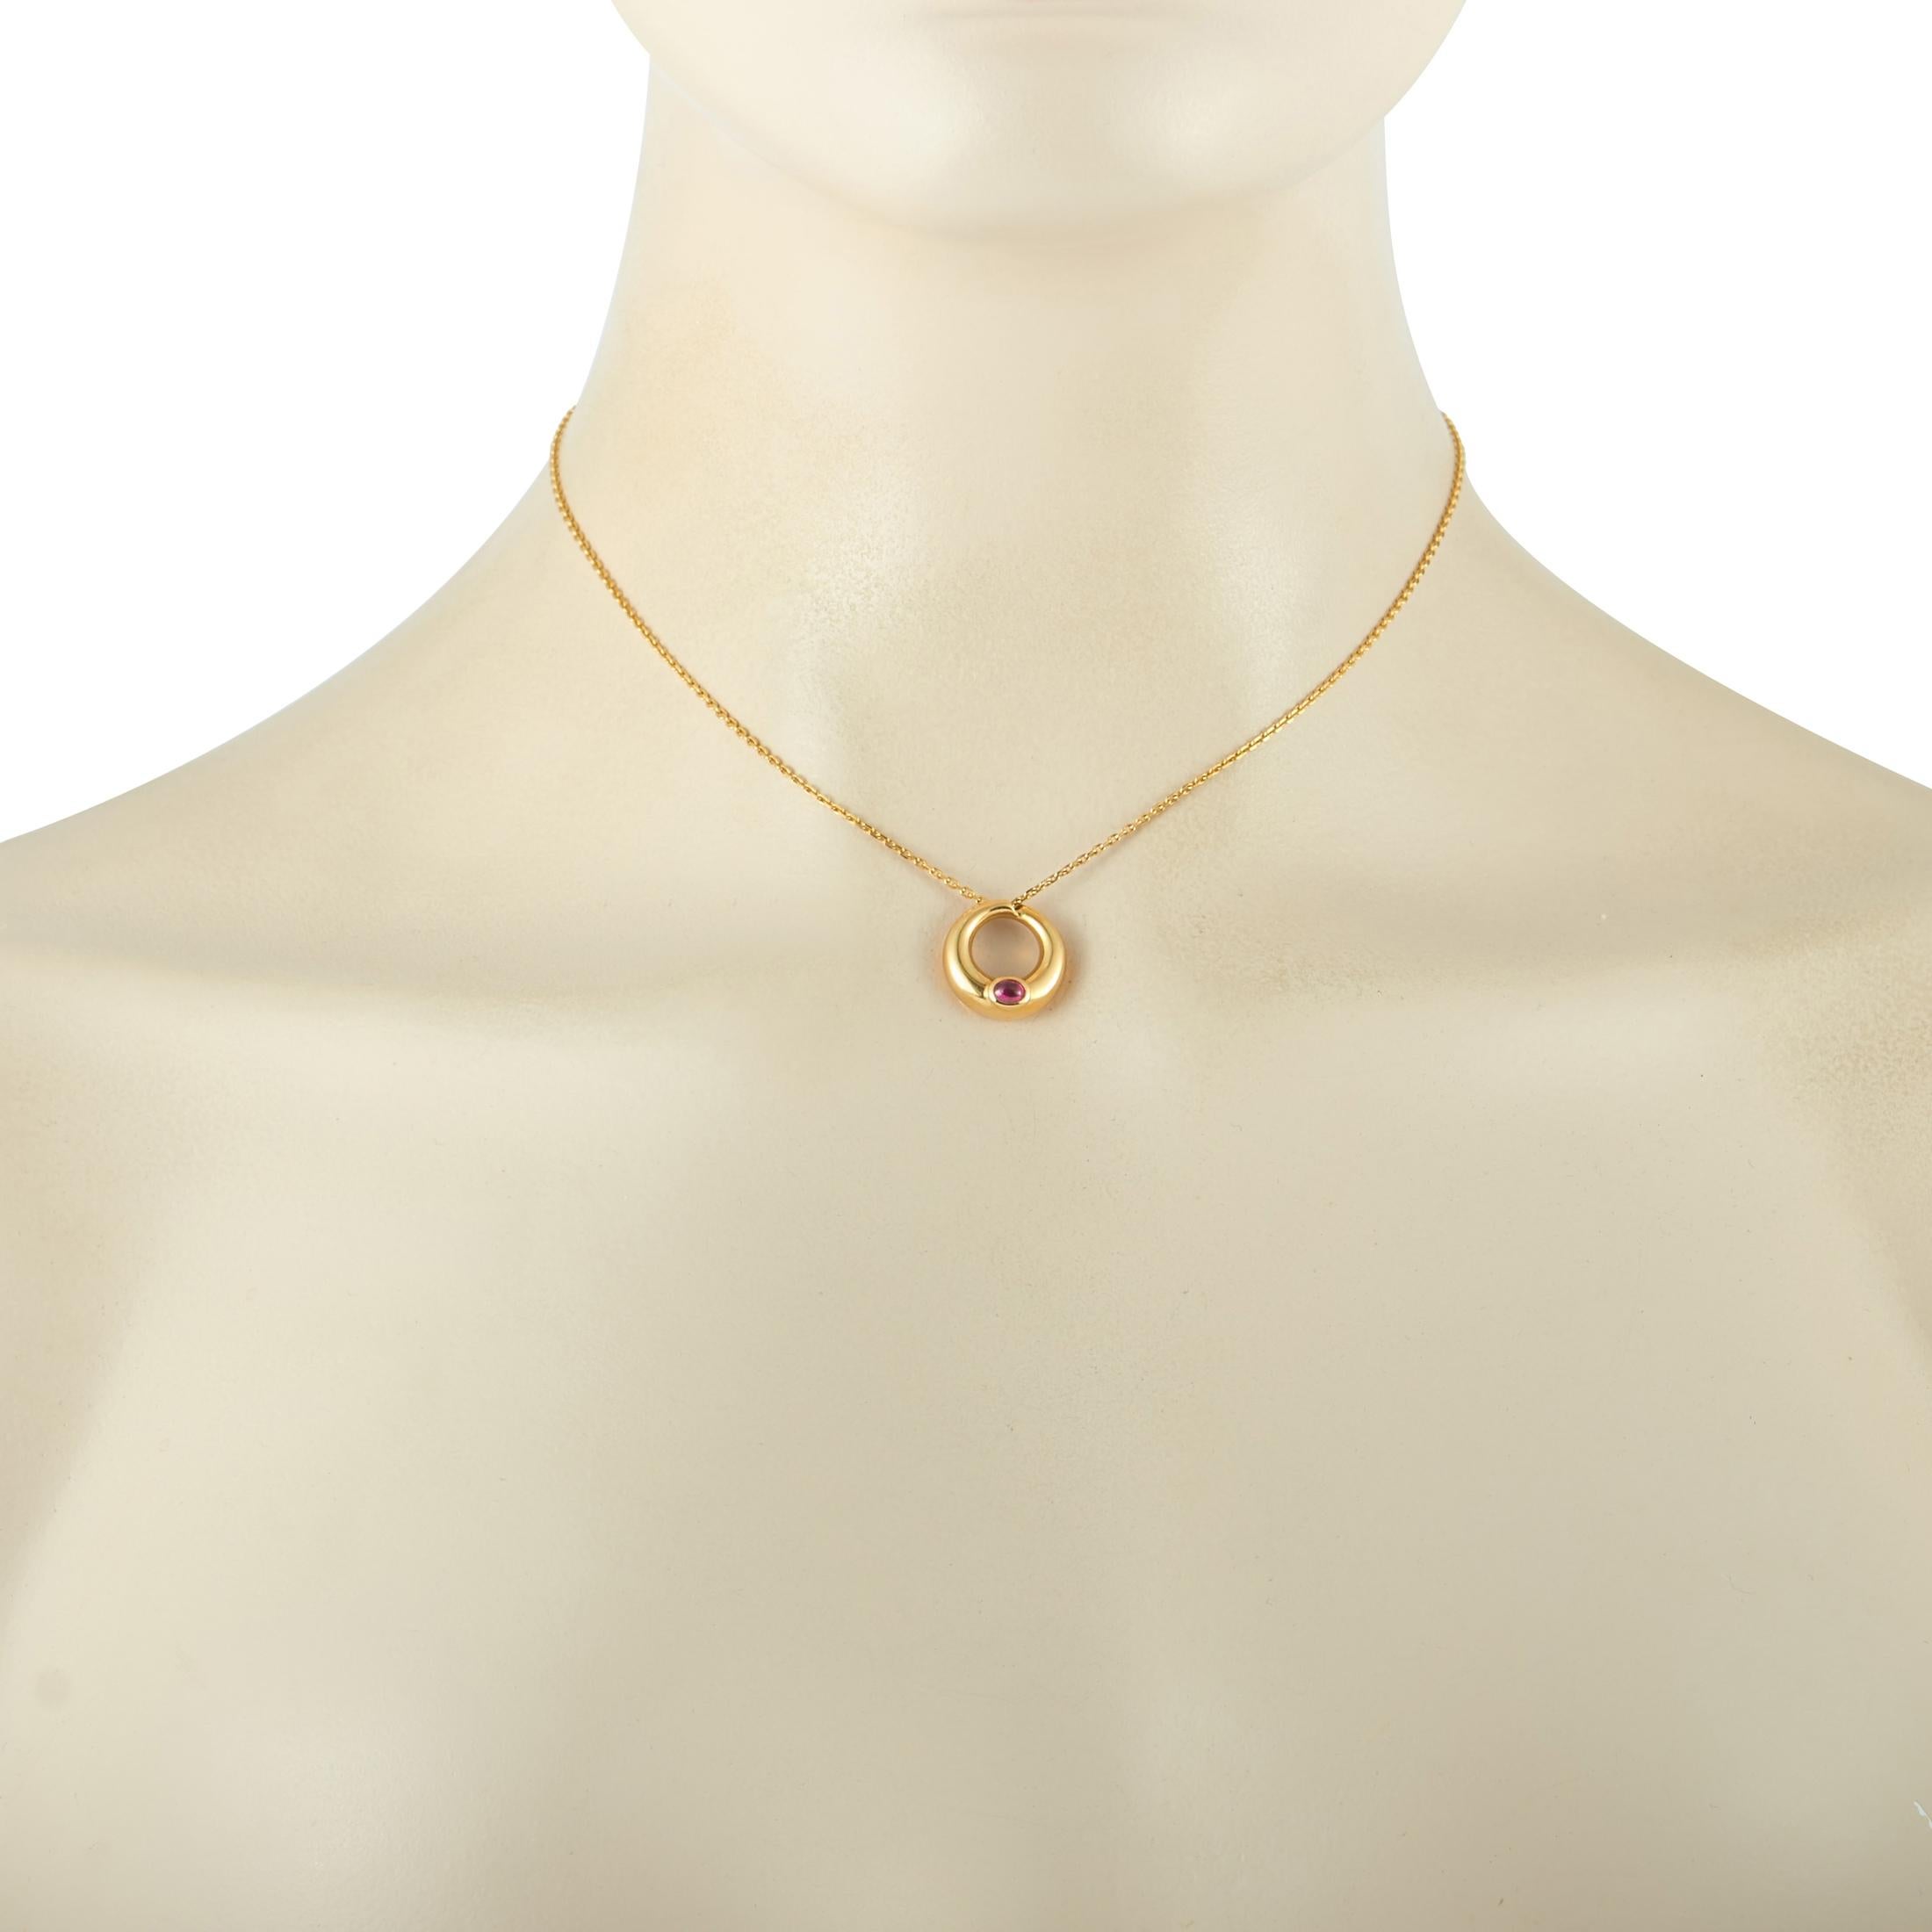 This Chaumet necklace is made of 18K yellow gold and embellished with a ruby. The necklace weighs 6.5 grams and boasts a 15” chain and a pendant that measures 0.62” in length and 0.62” in width.
 
 Offered in estate condition, this jewelry piece